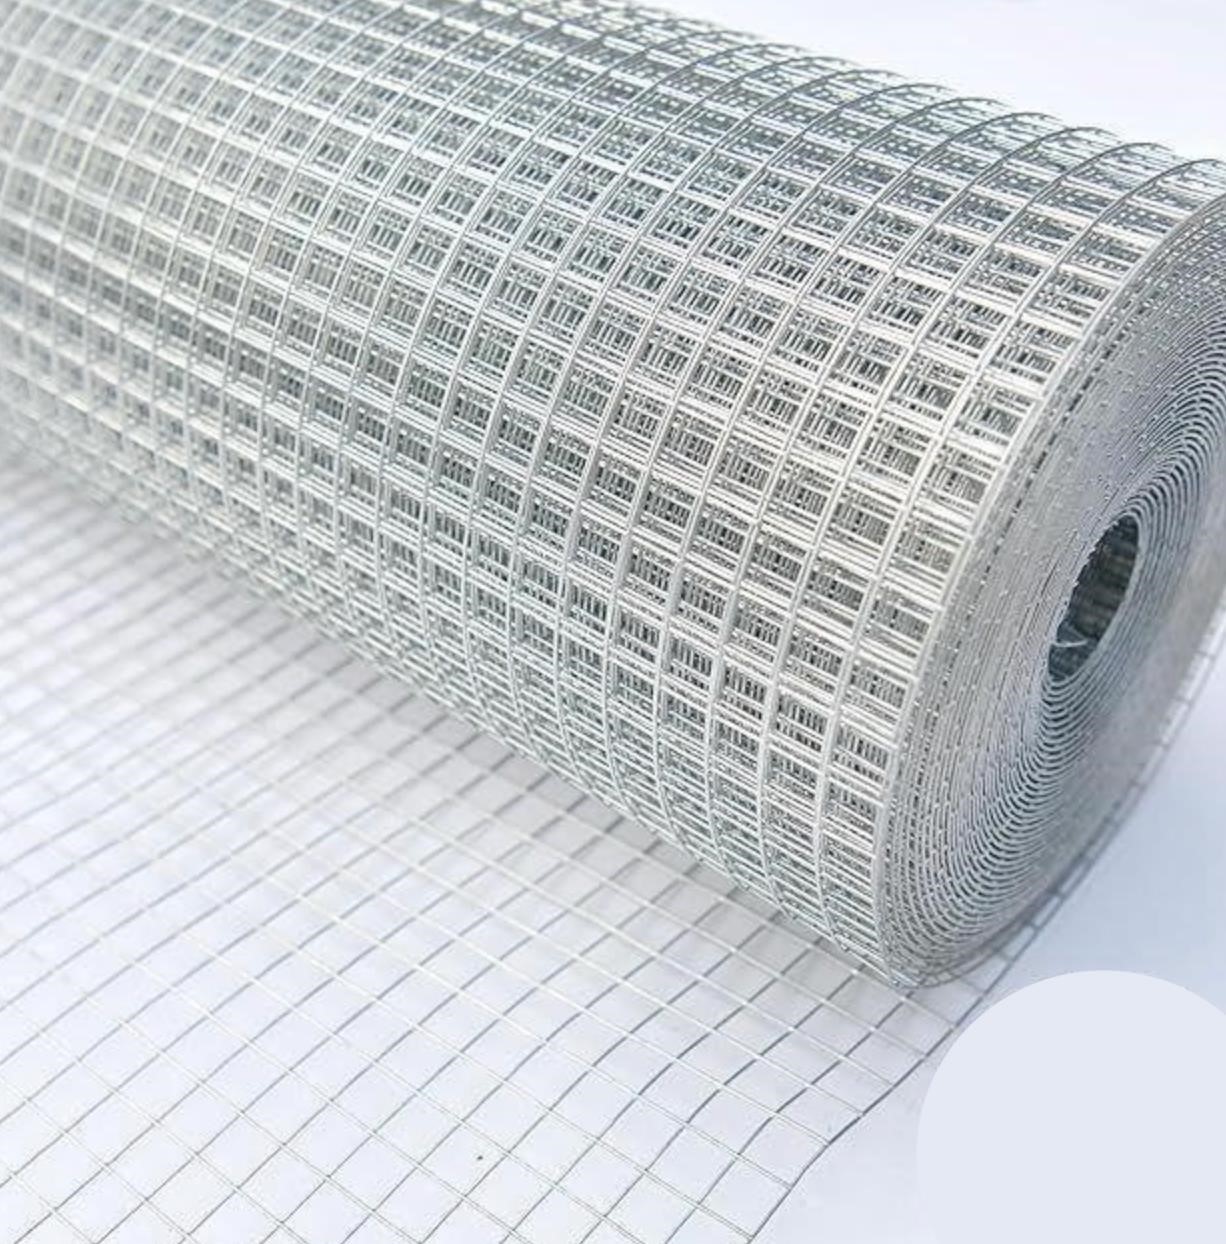 Yeson Hardware Cloth Chicken Wire Fencing Mesh